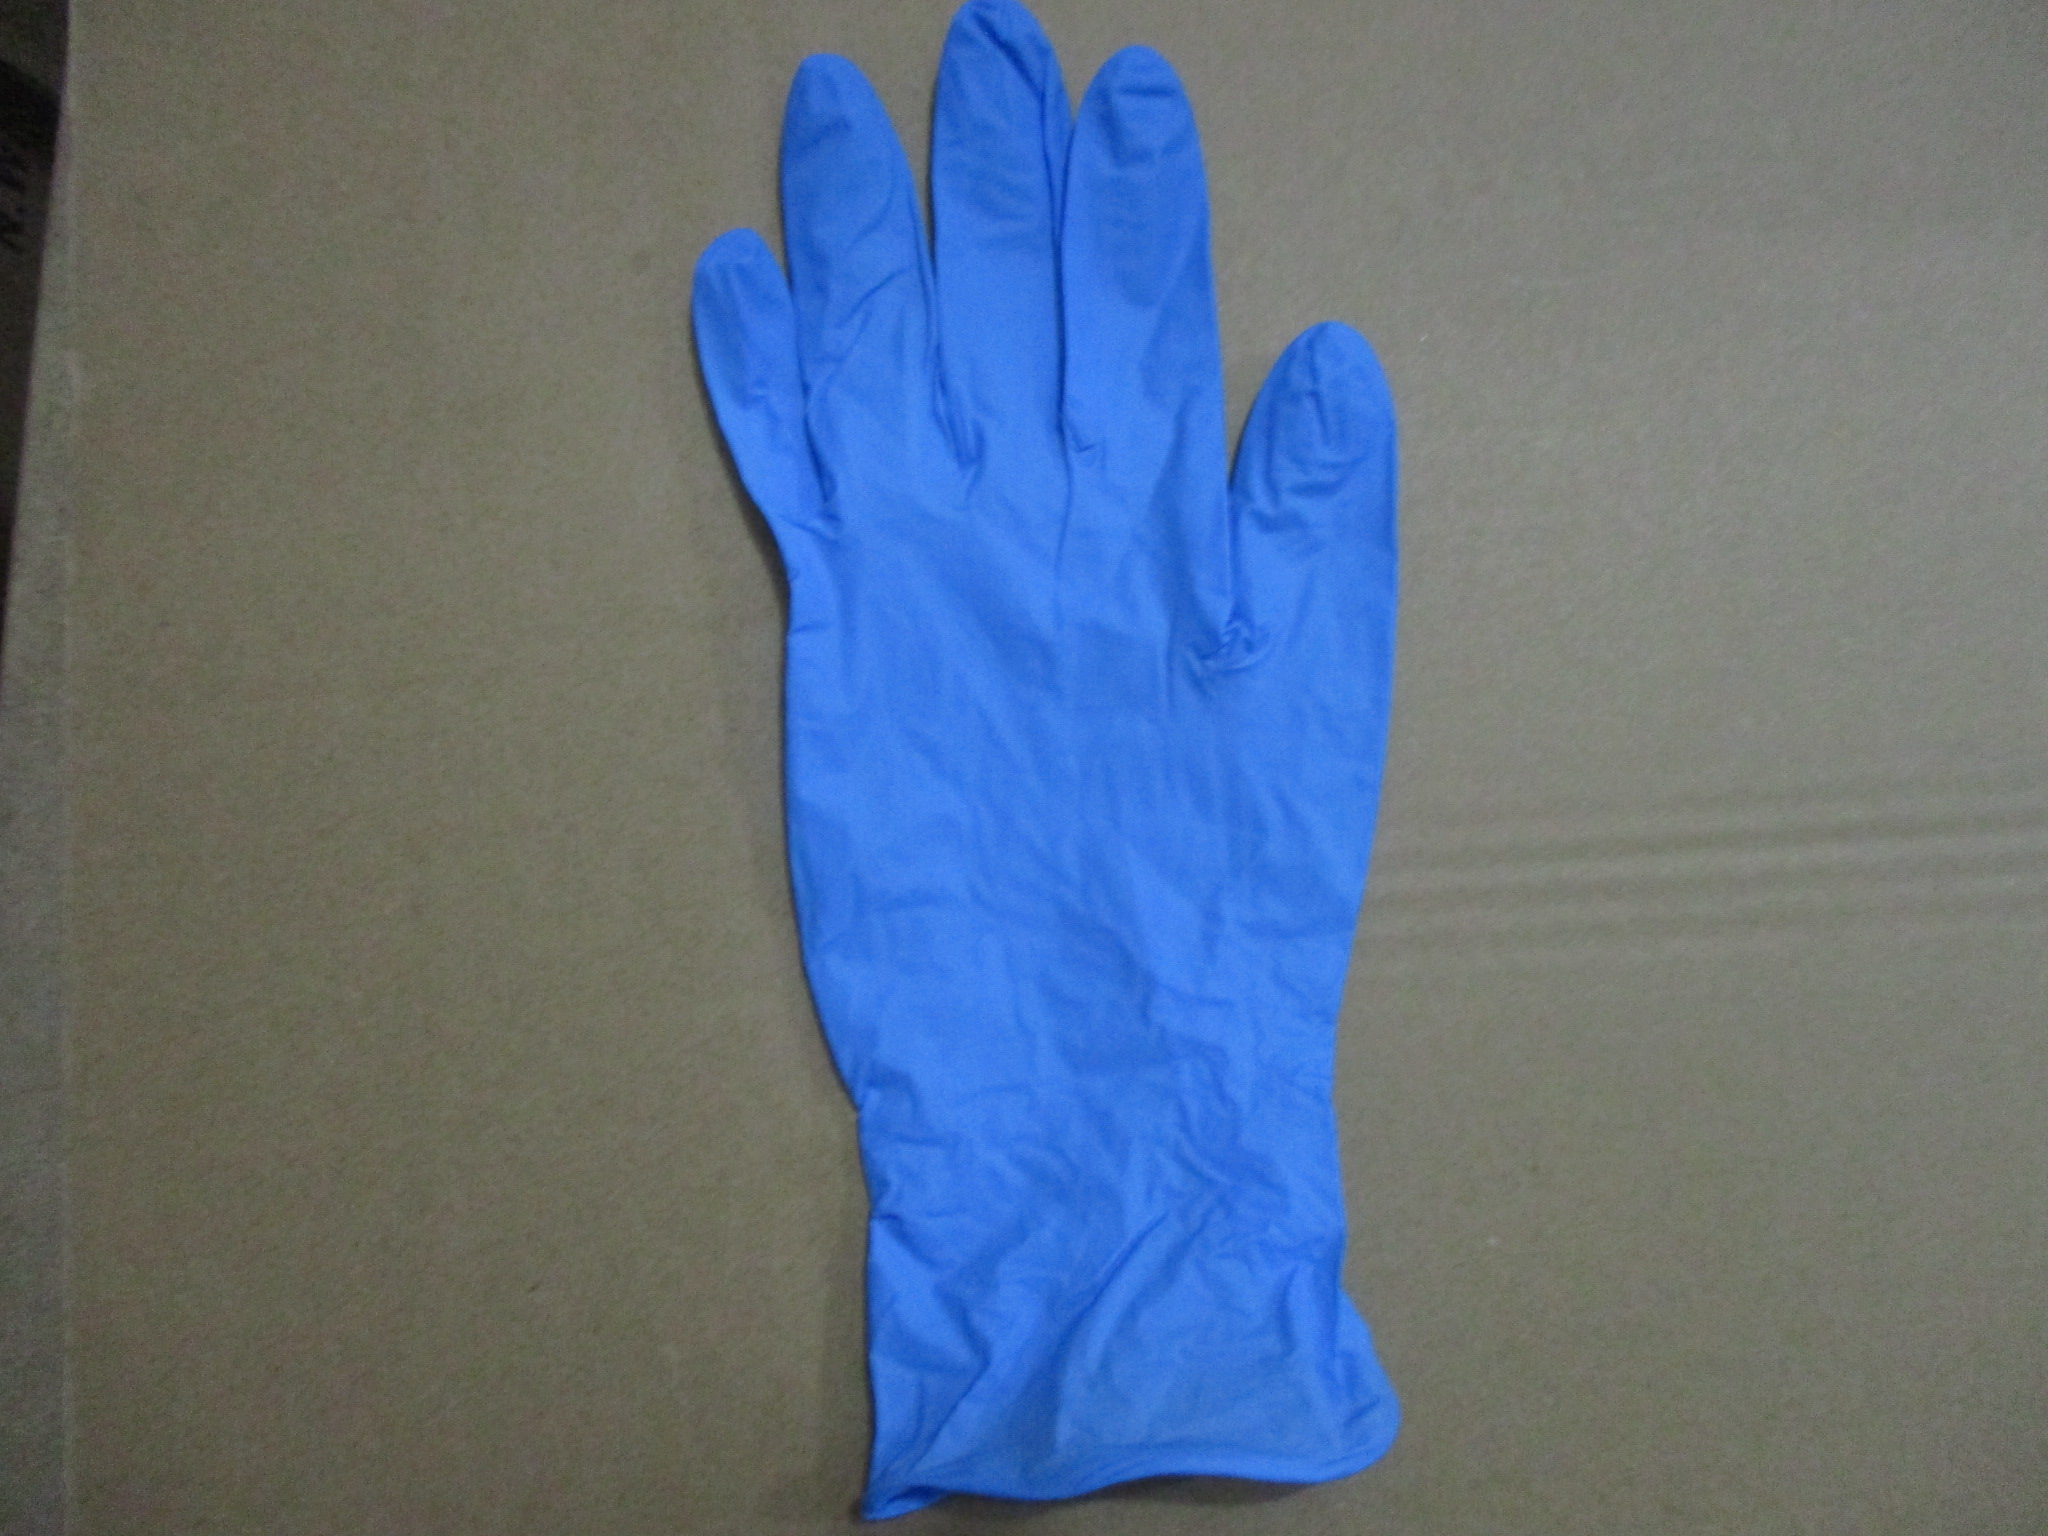 100% Inspection Blue nitrile gloves Inspection Final Production Inspection AQL Function Test China Third Party Inspection Zhejiang Inspector for Blue nitrile gloves